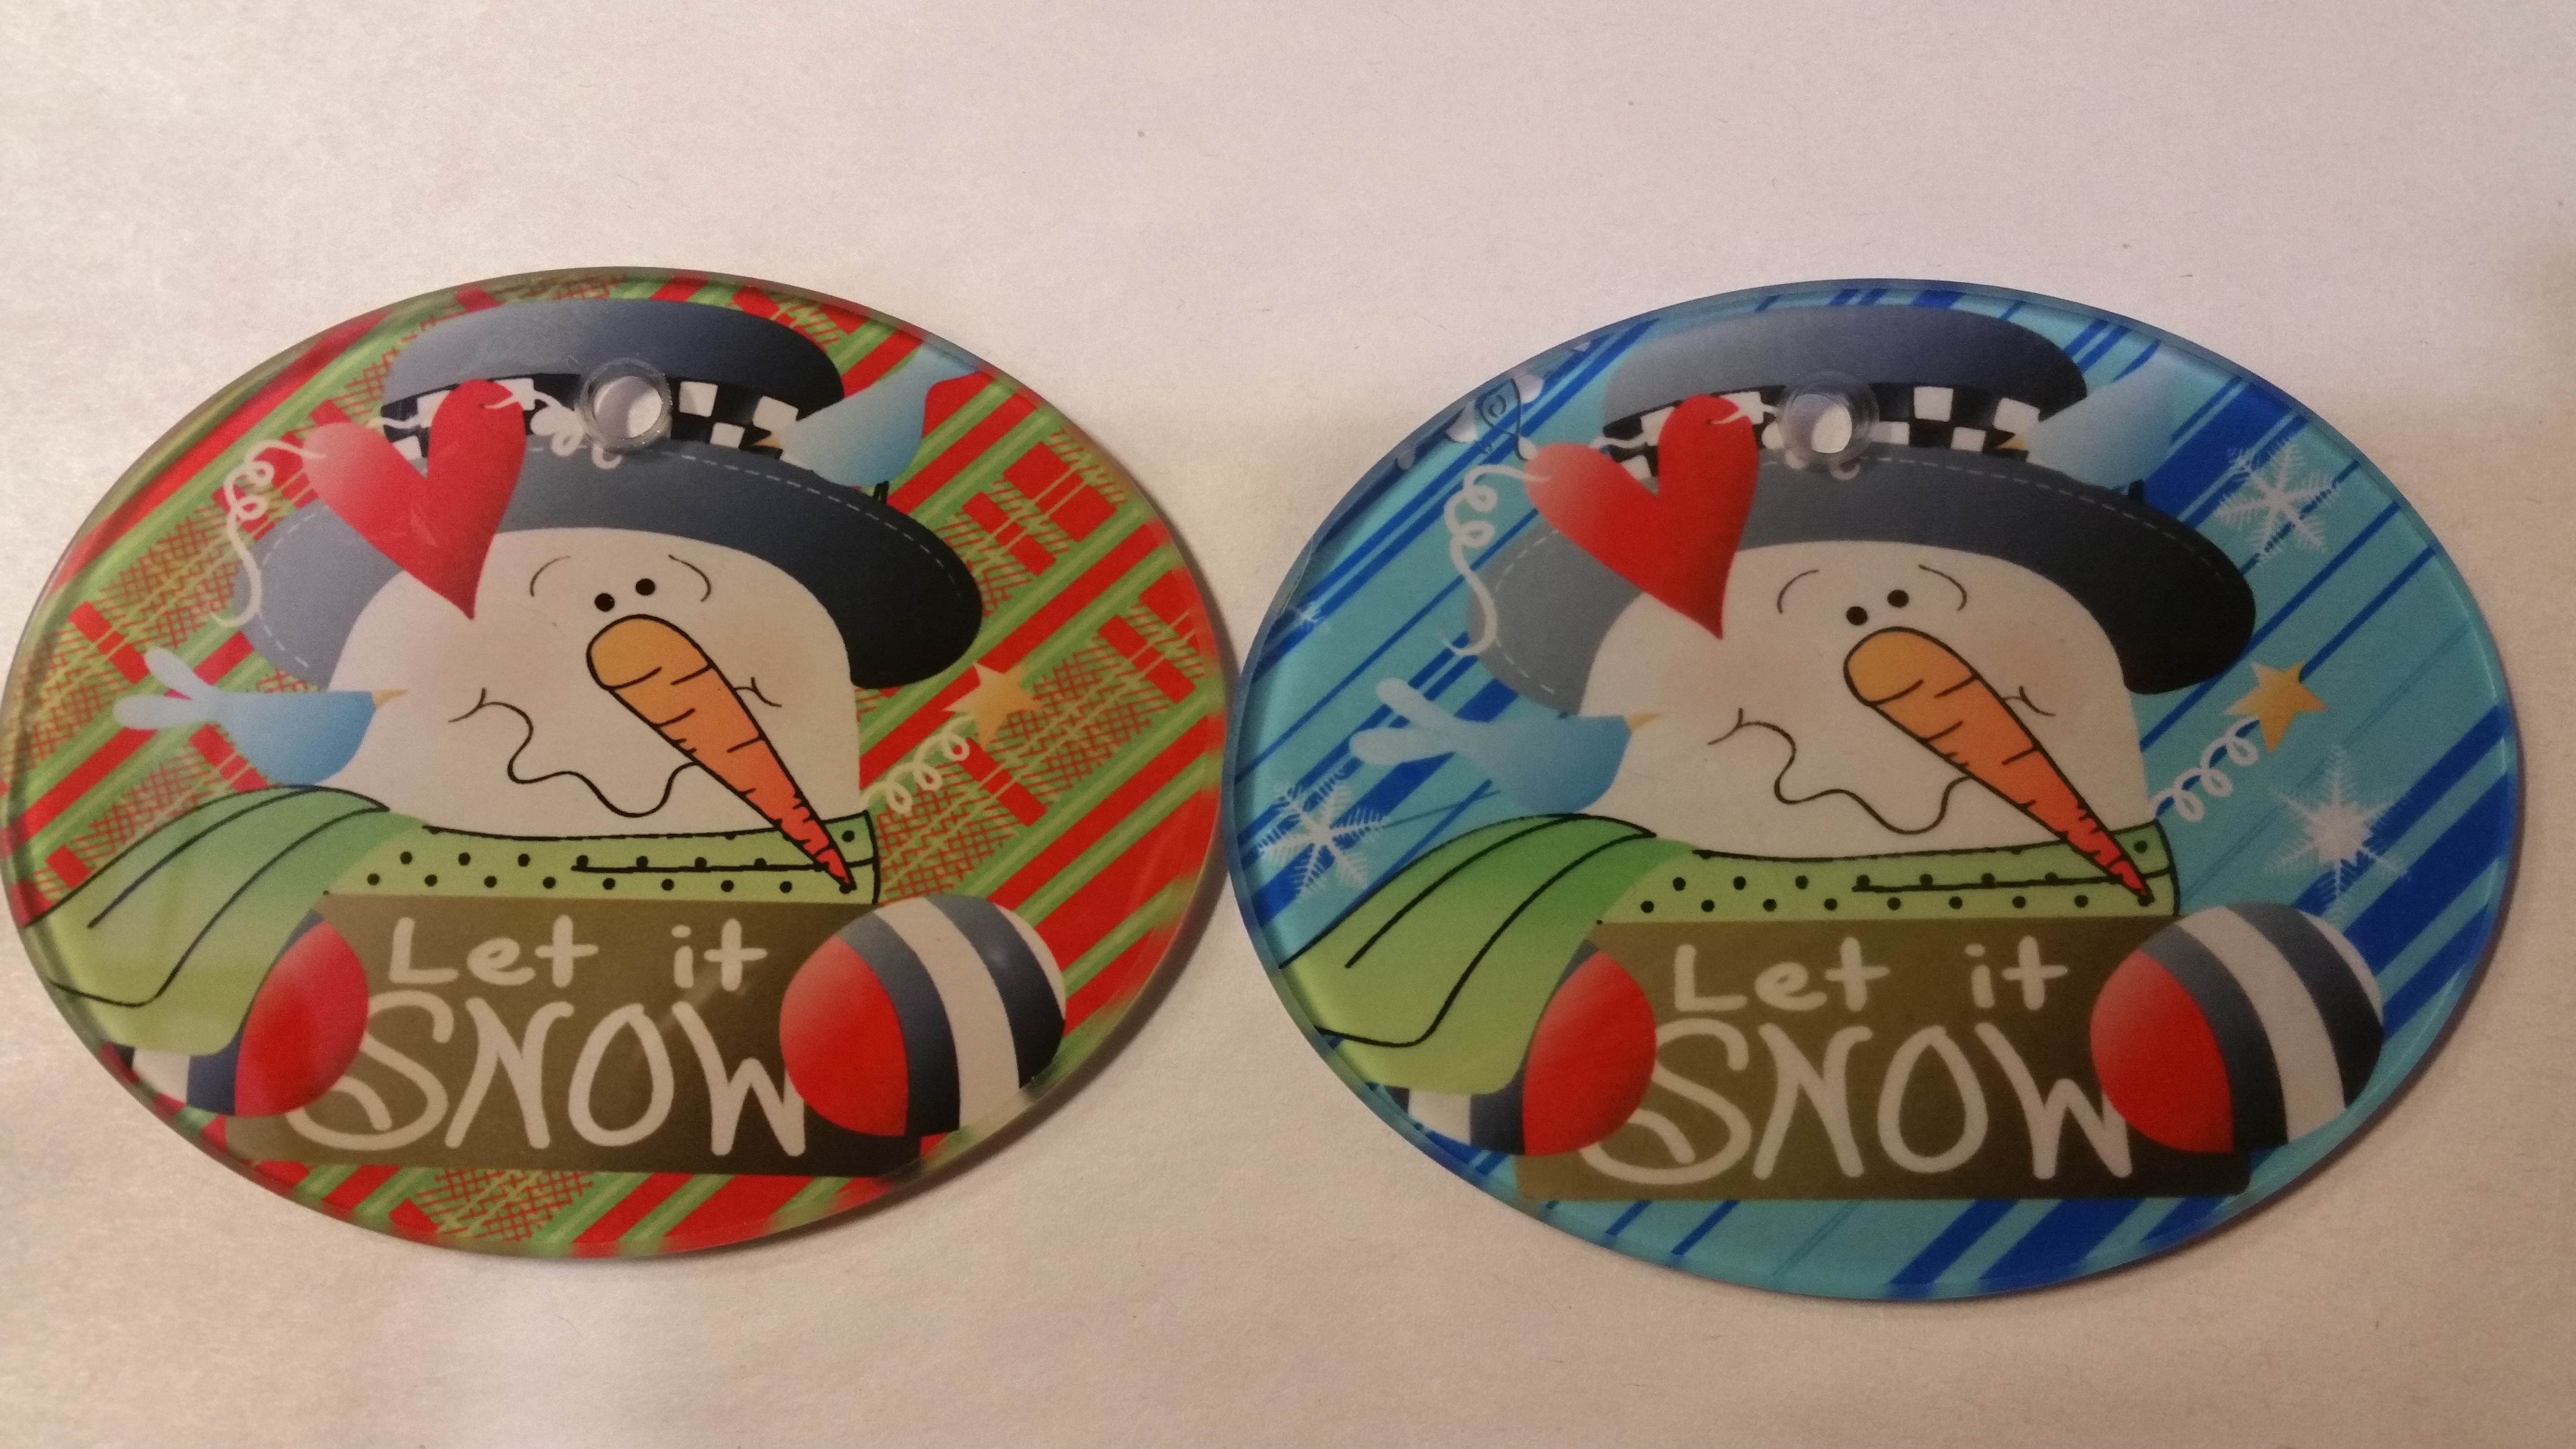 Snowman Ornaments made with sublimation printing